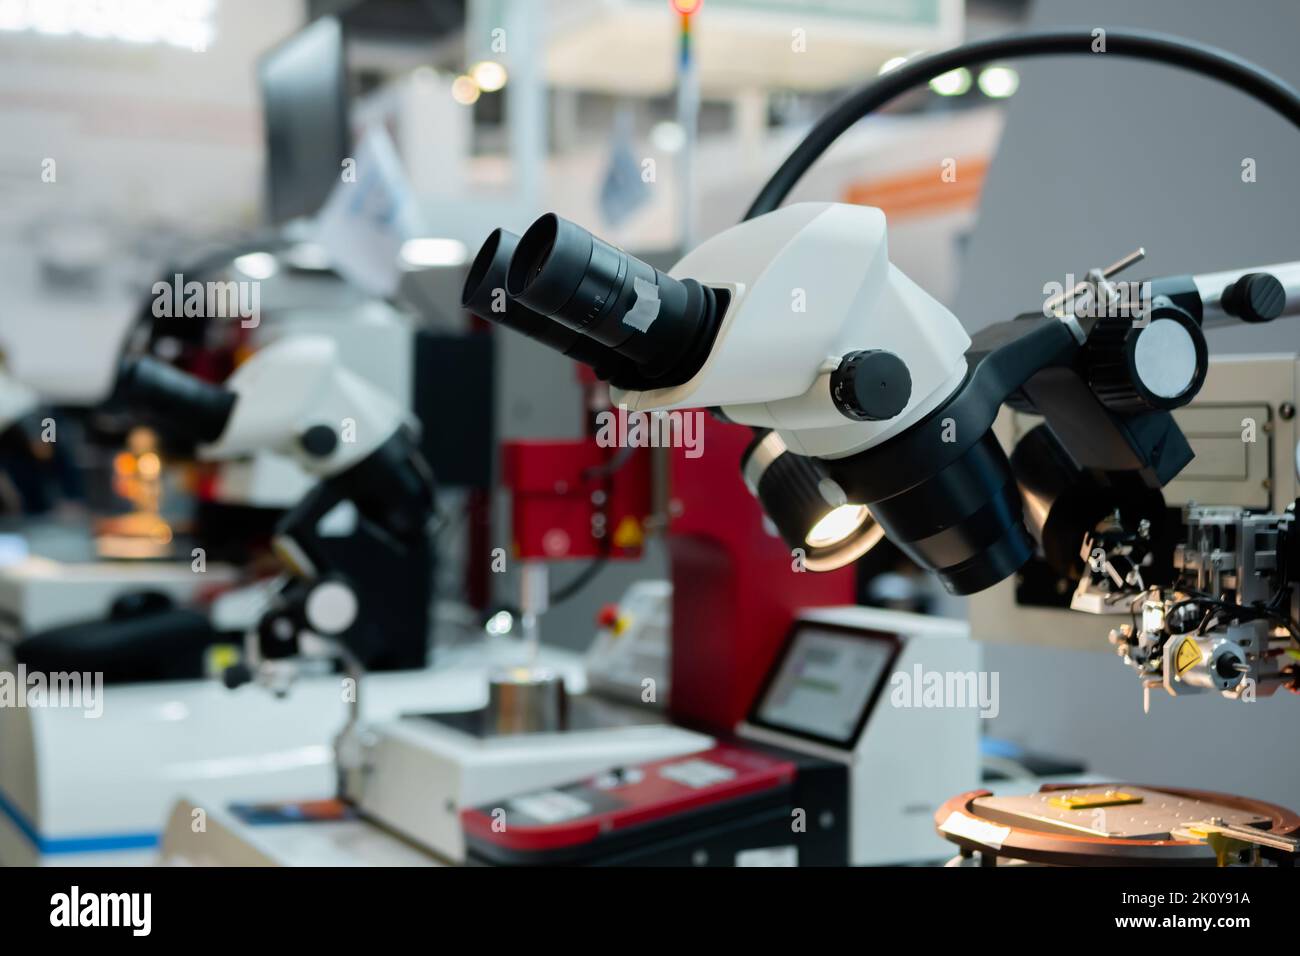 Professional medical microscope in science lab, exhibition Stock Photo